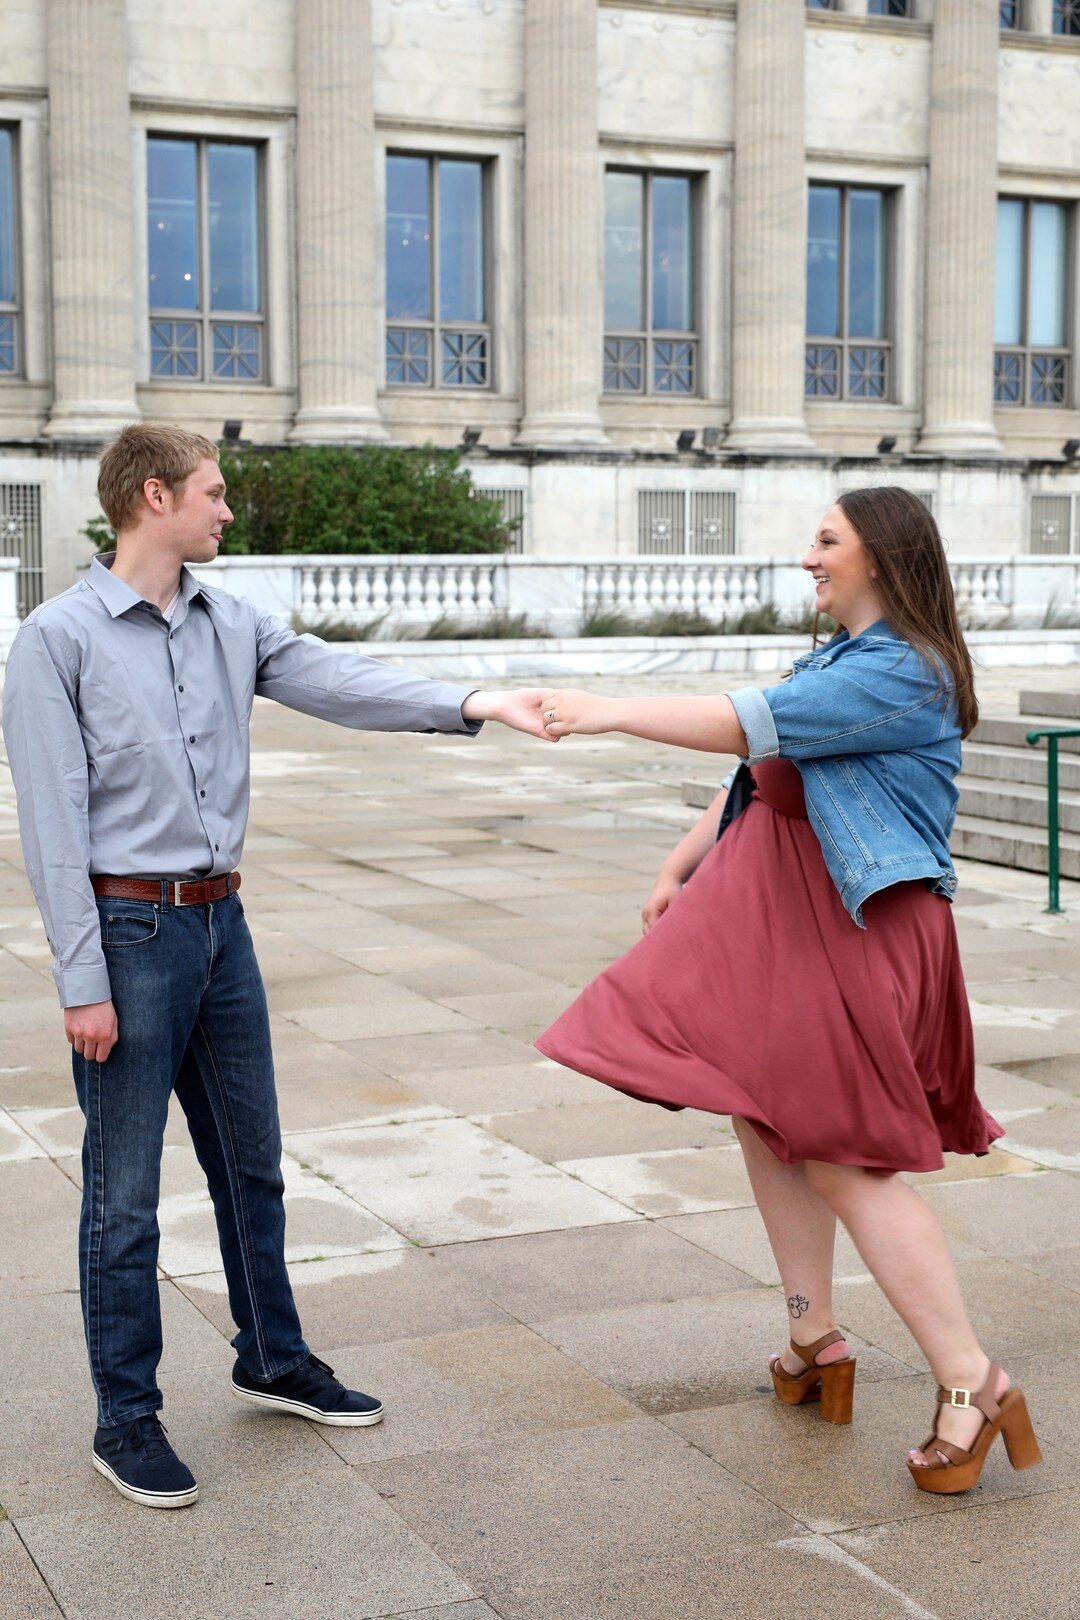 Casual Downtown Chicago Engagement Session captured by Messy Photography. See more engagement photo ideas at CHItheeWED.com!